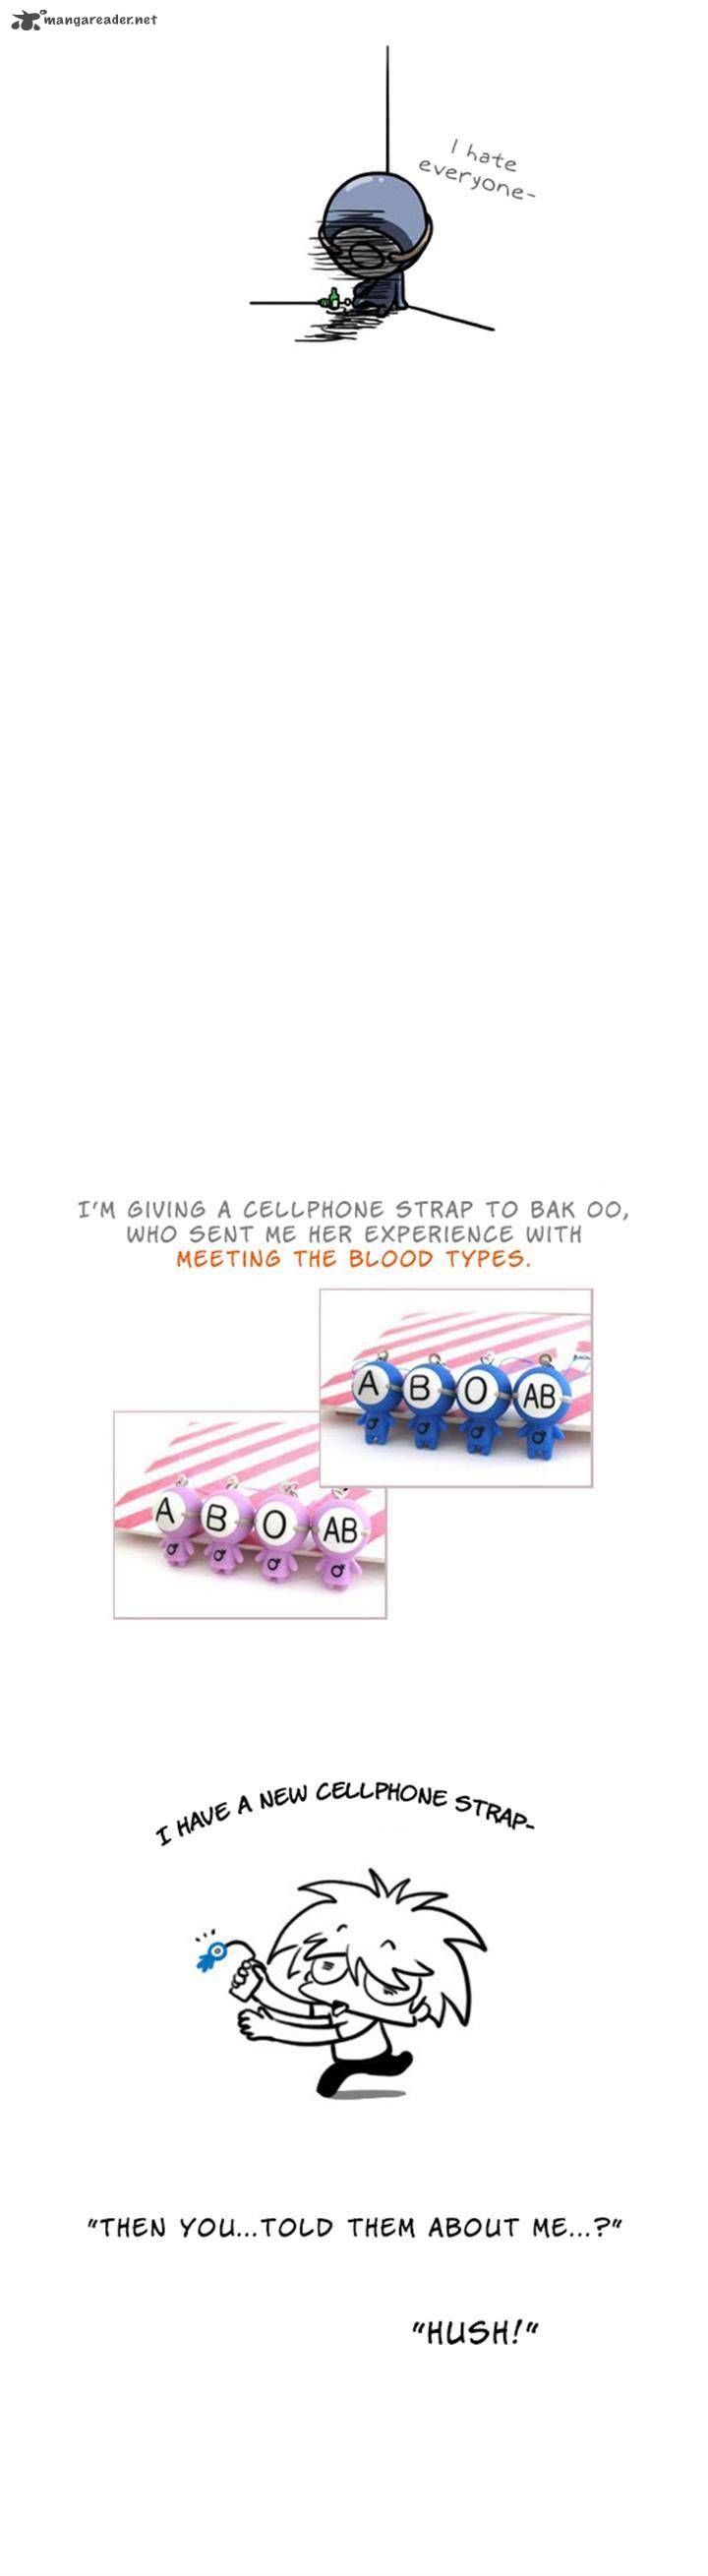 A Simple Thinking About Blood Types 15 8